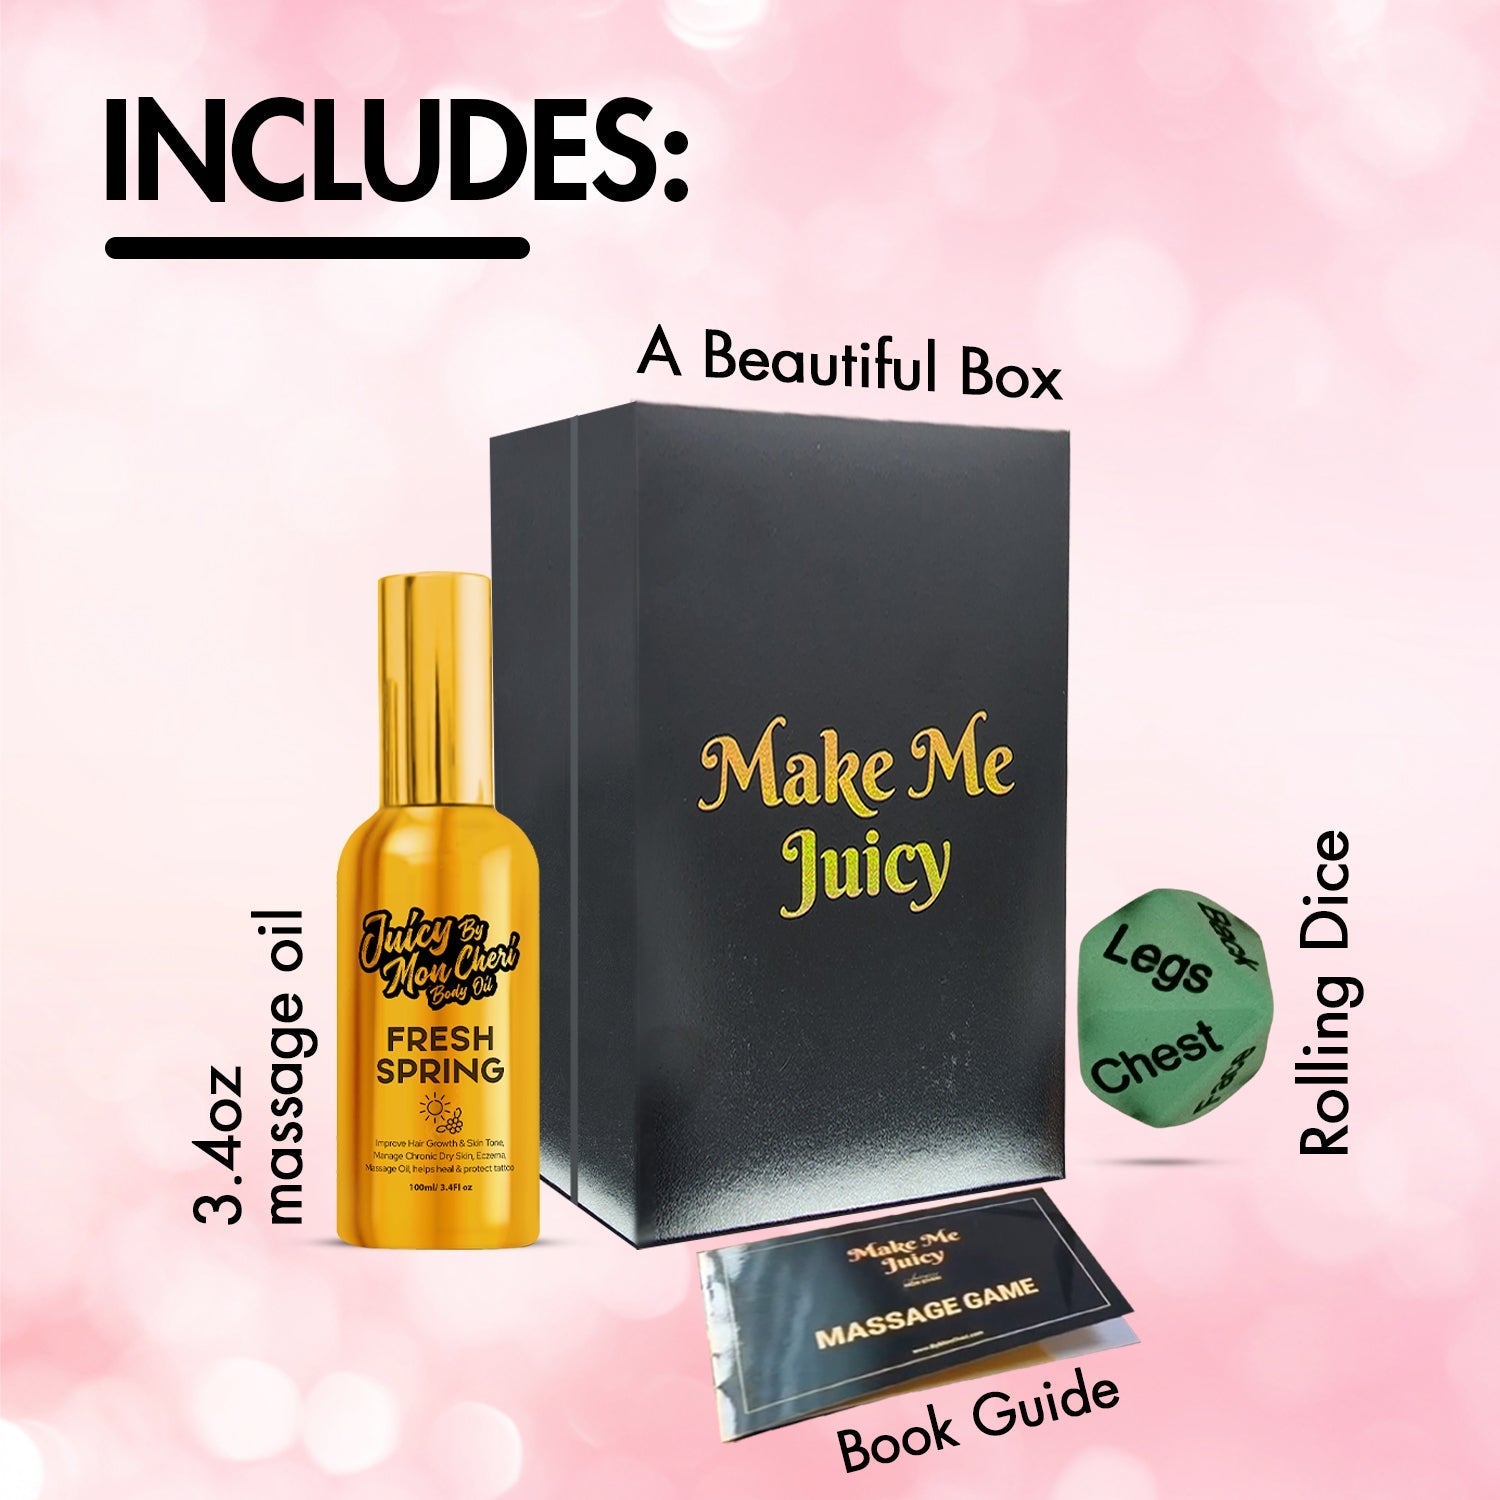 Juicy by Mon Cheri's Couples Massage Oil and Rolling Dice Game